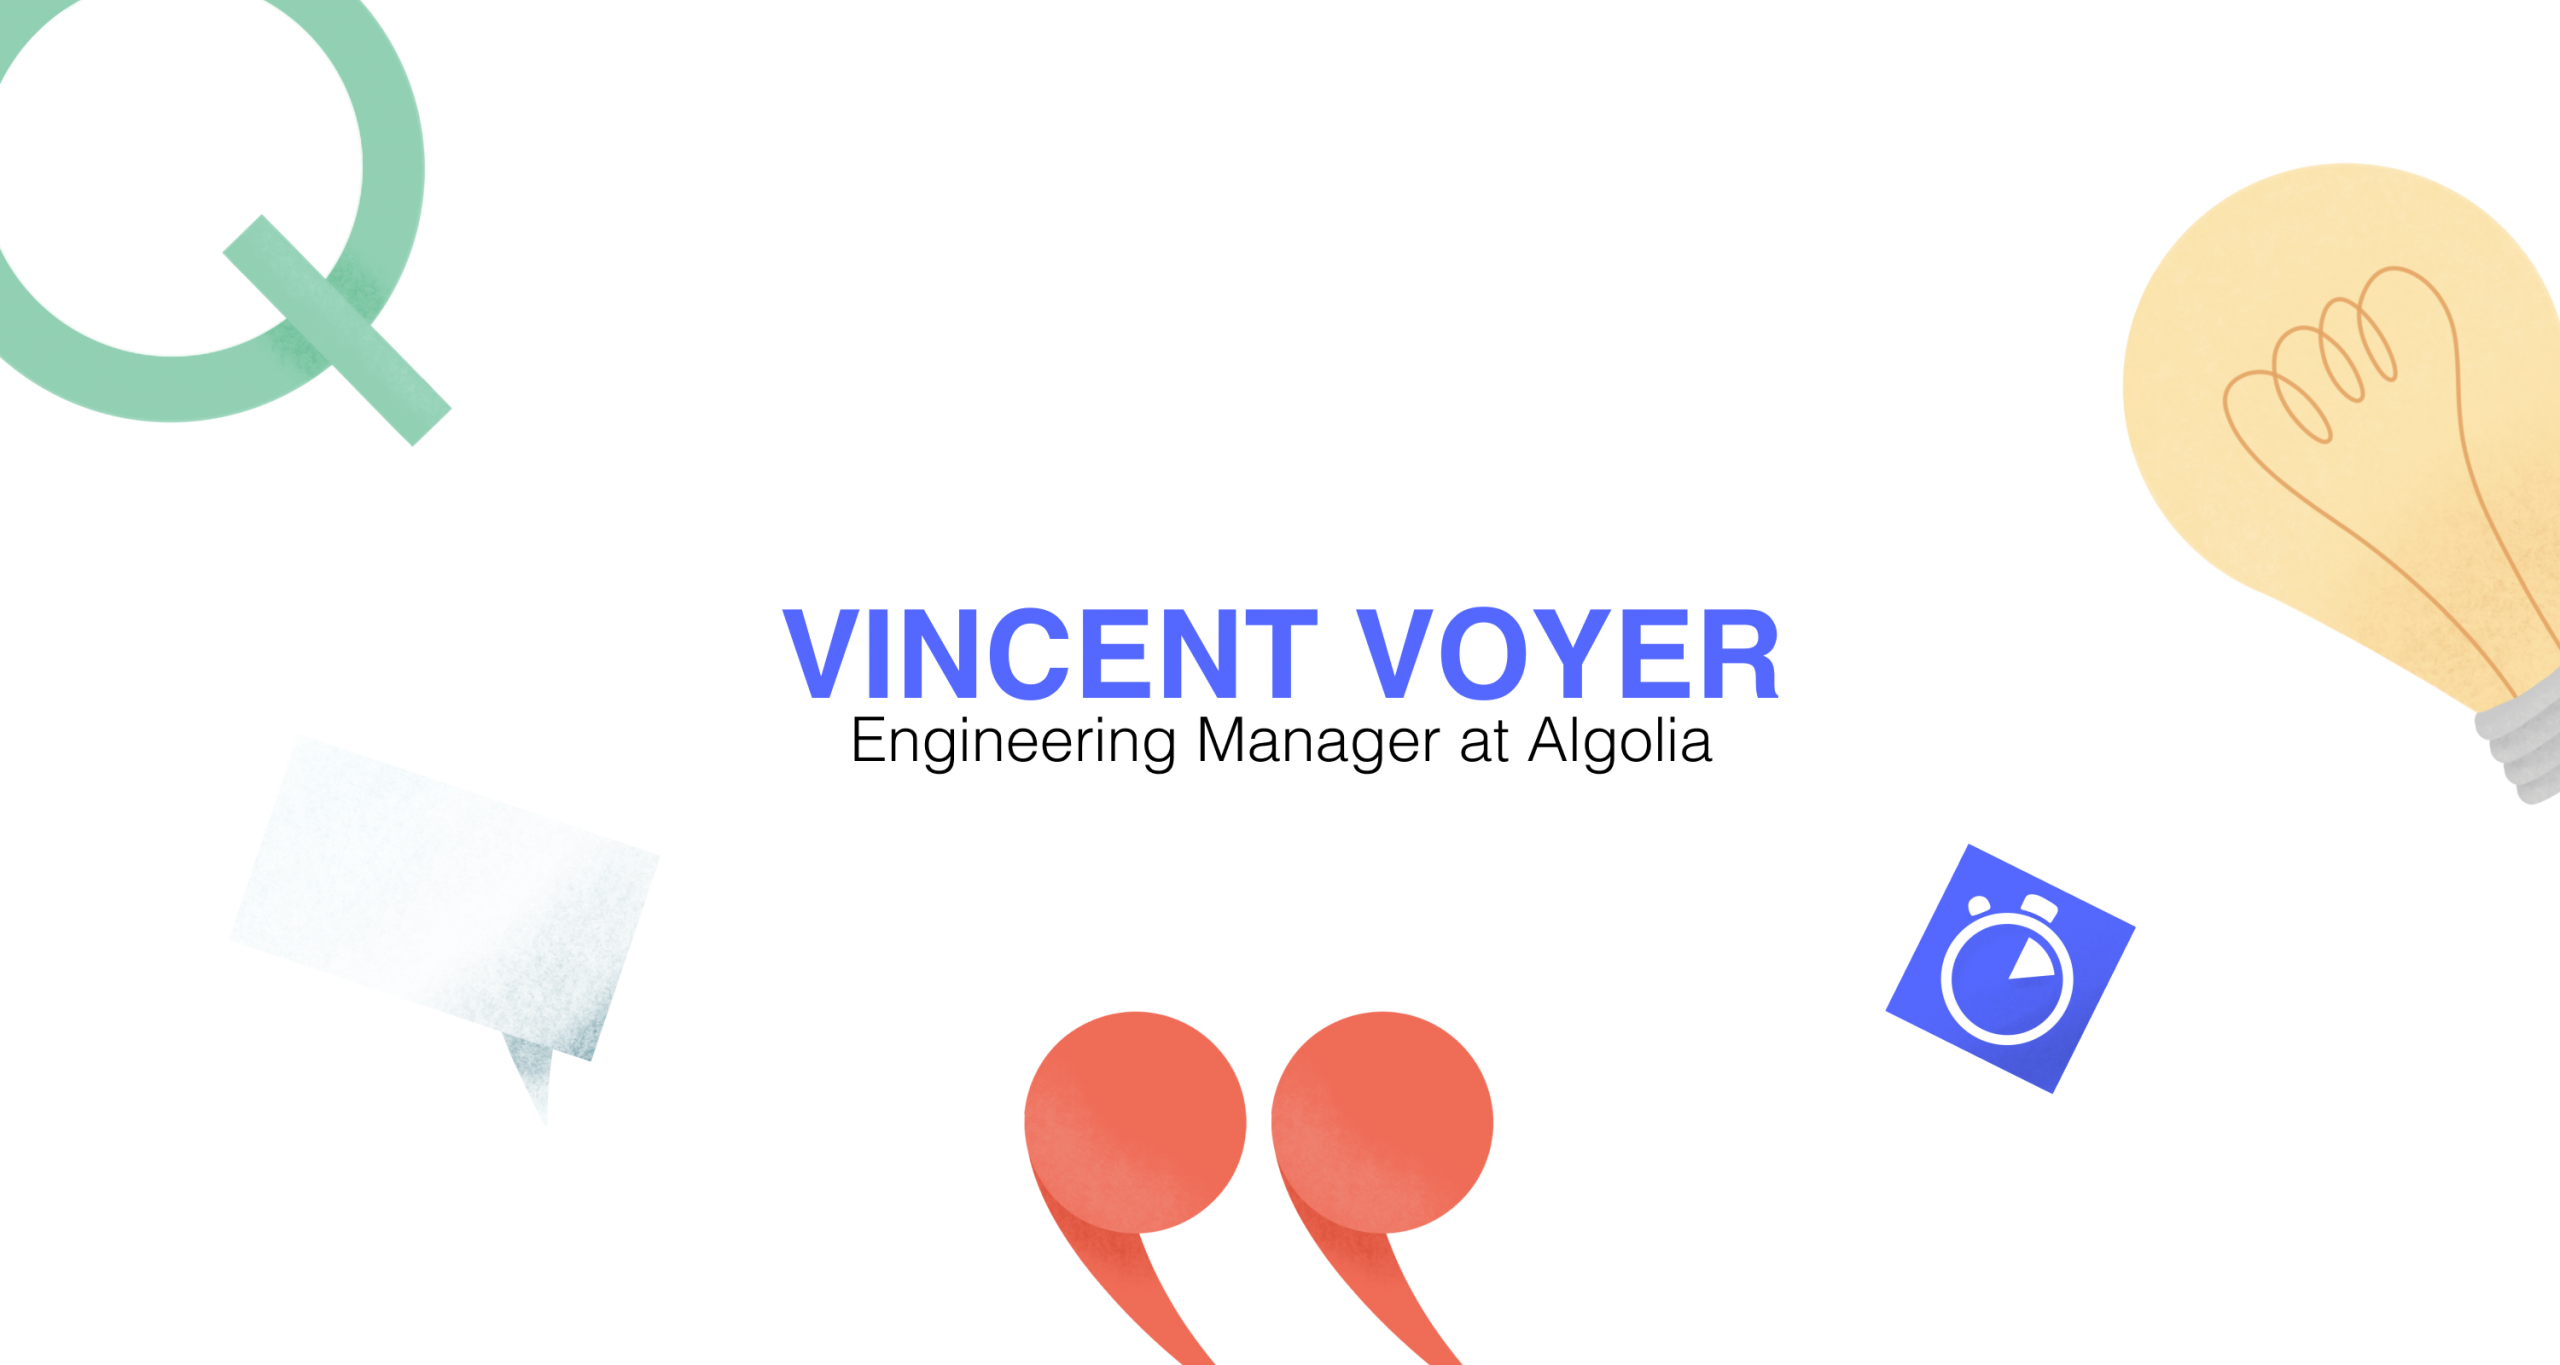 Q&A with Vincent Voyer, Engineering Manager at Algolia